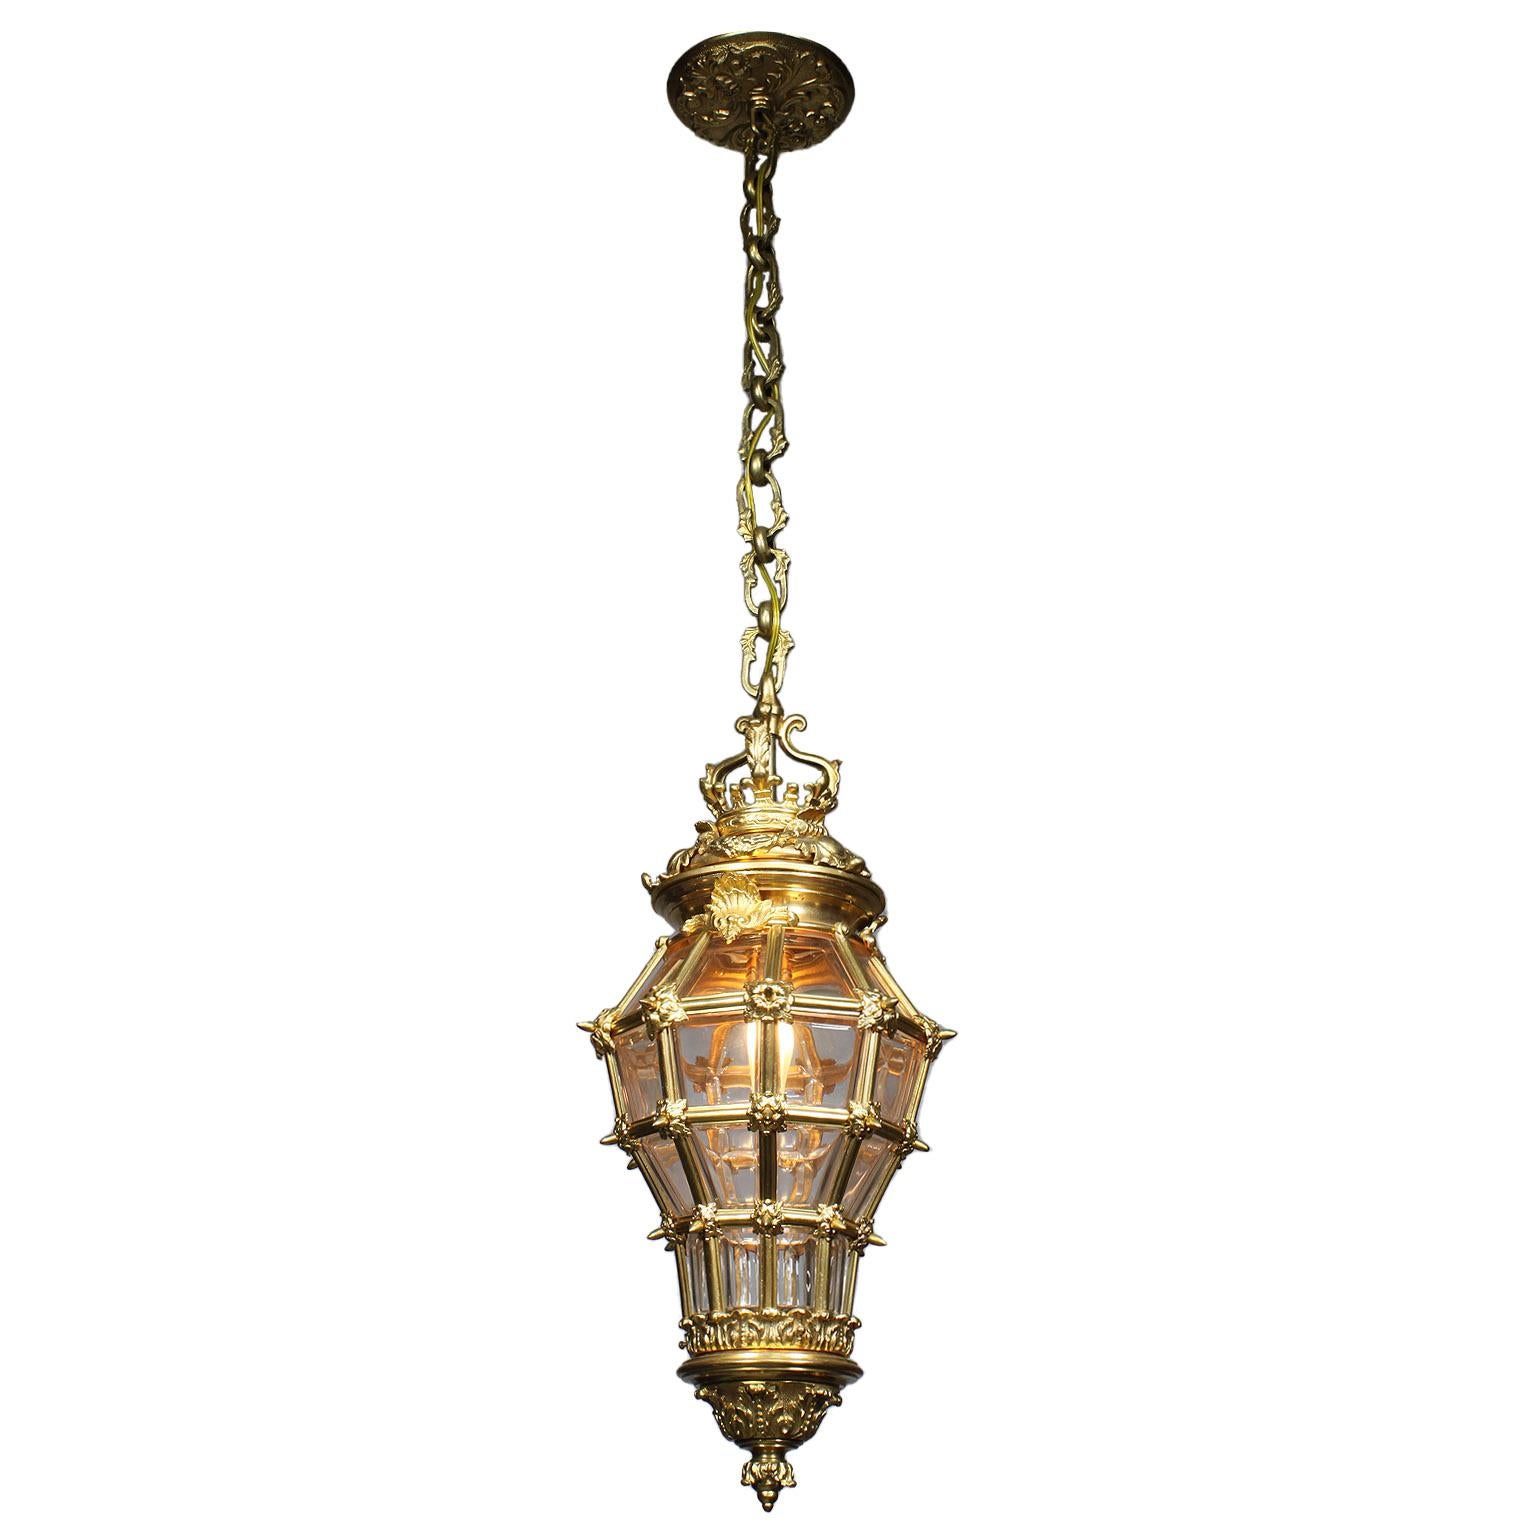 A fine and charming French Louis XIV style 19th-20th century gilt bronze and molded glass 